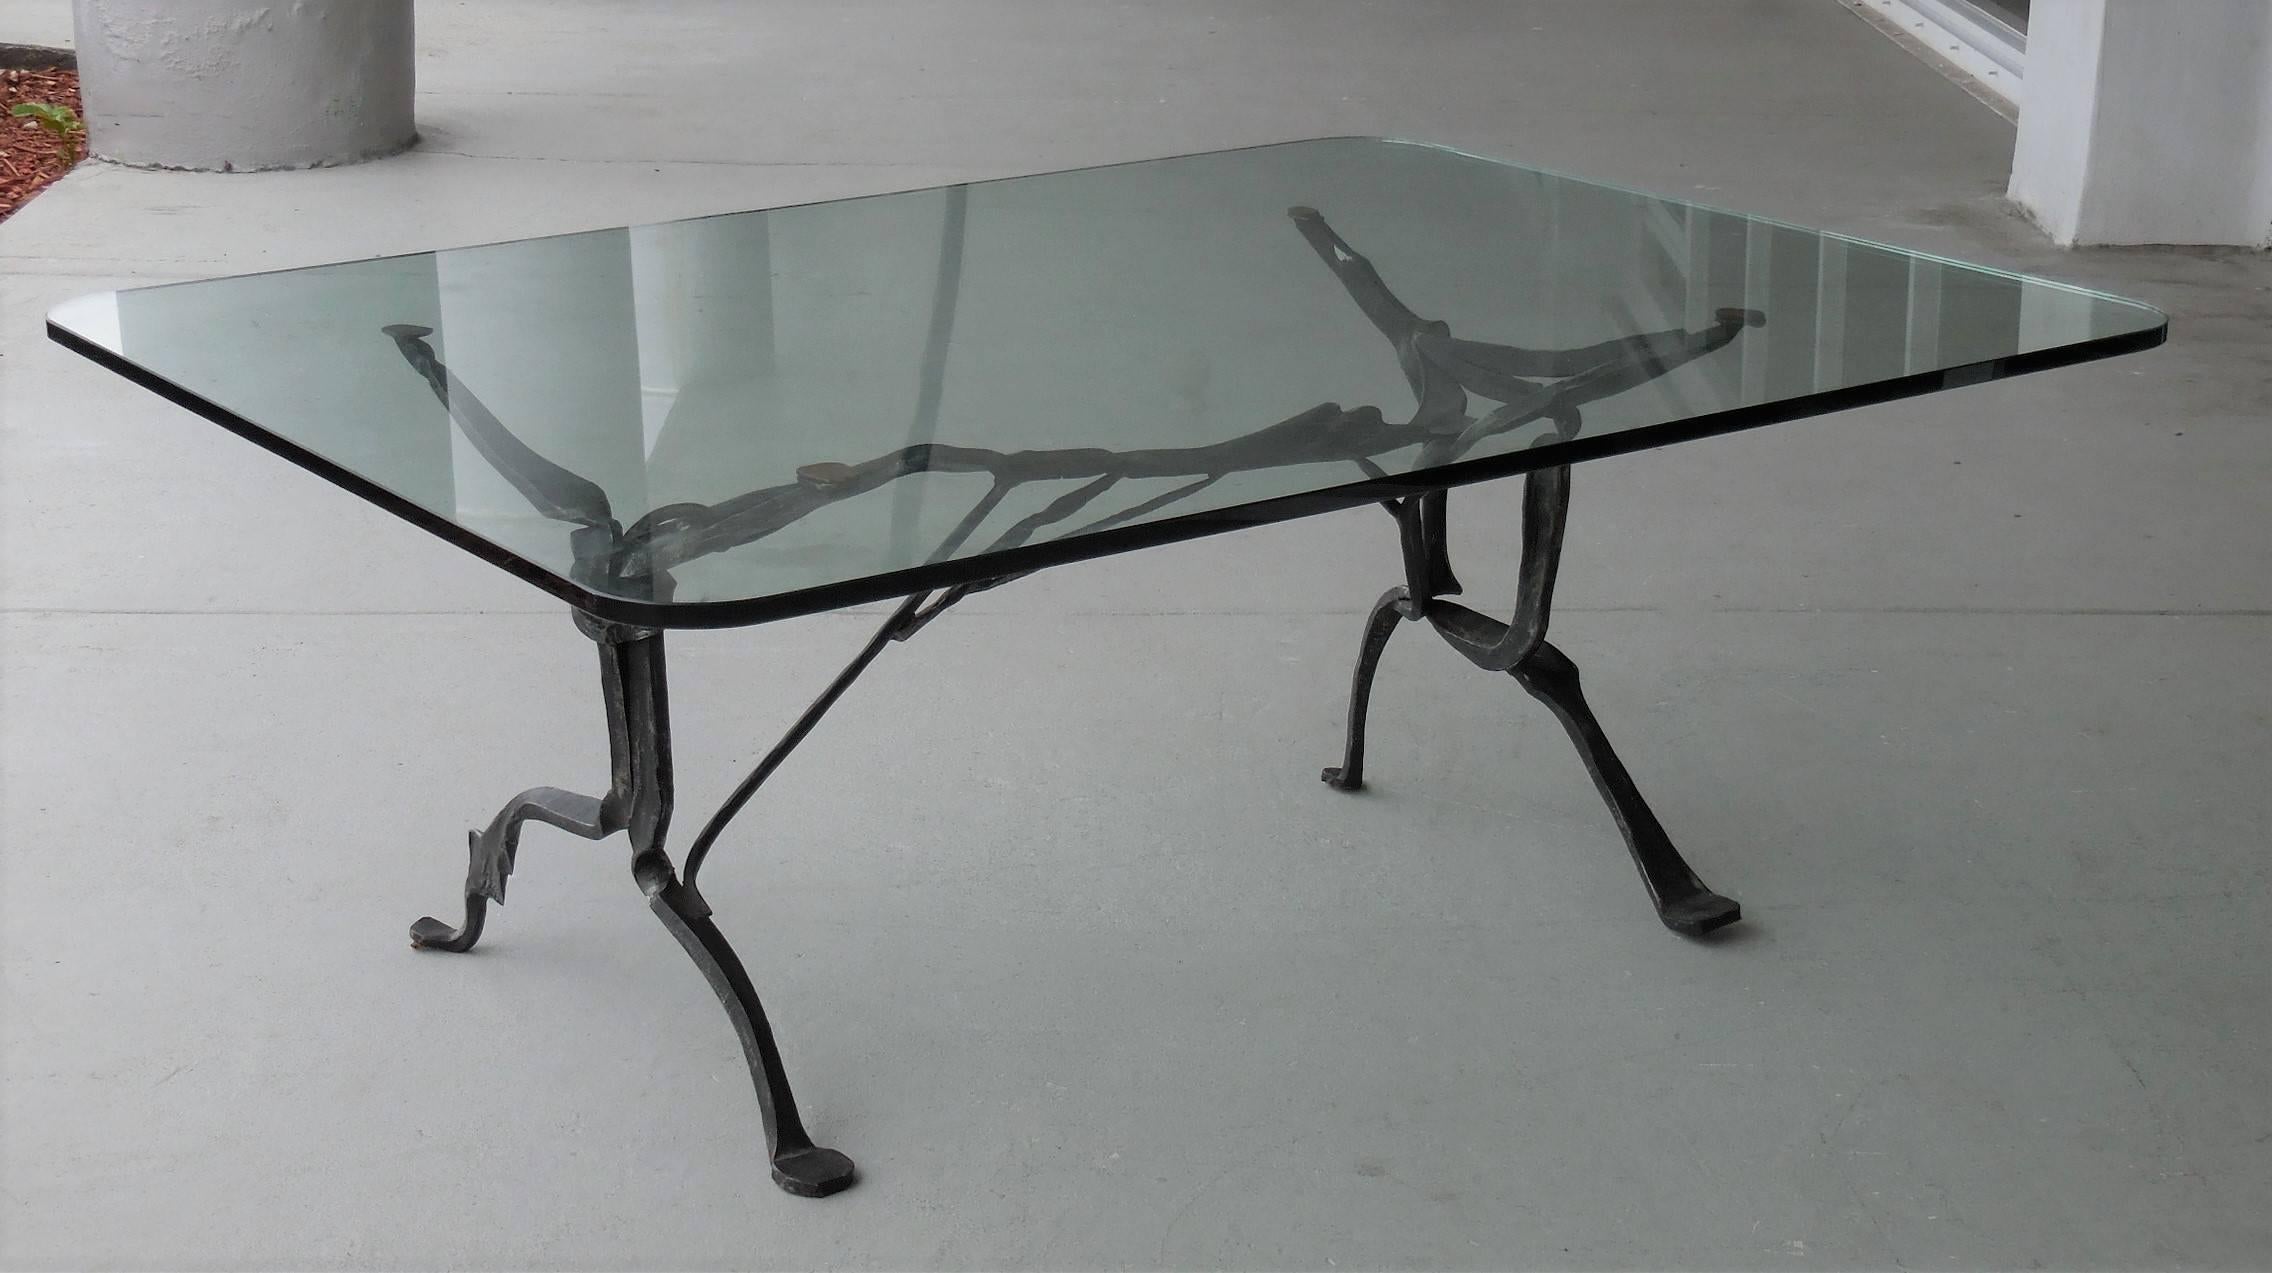 Rare coffee table by Sido and Francois Thevenin for Sawaya et Moroni. Sculptural forged steel base with black patina, original glass top with radial corners. There are small fitted leather pads on feet and arms. Signed with plaque. Sculptural base